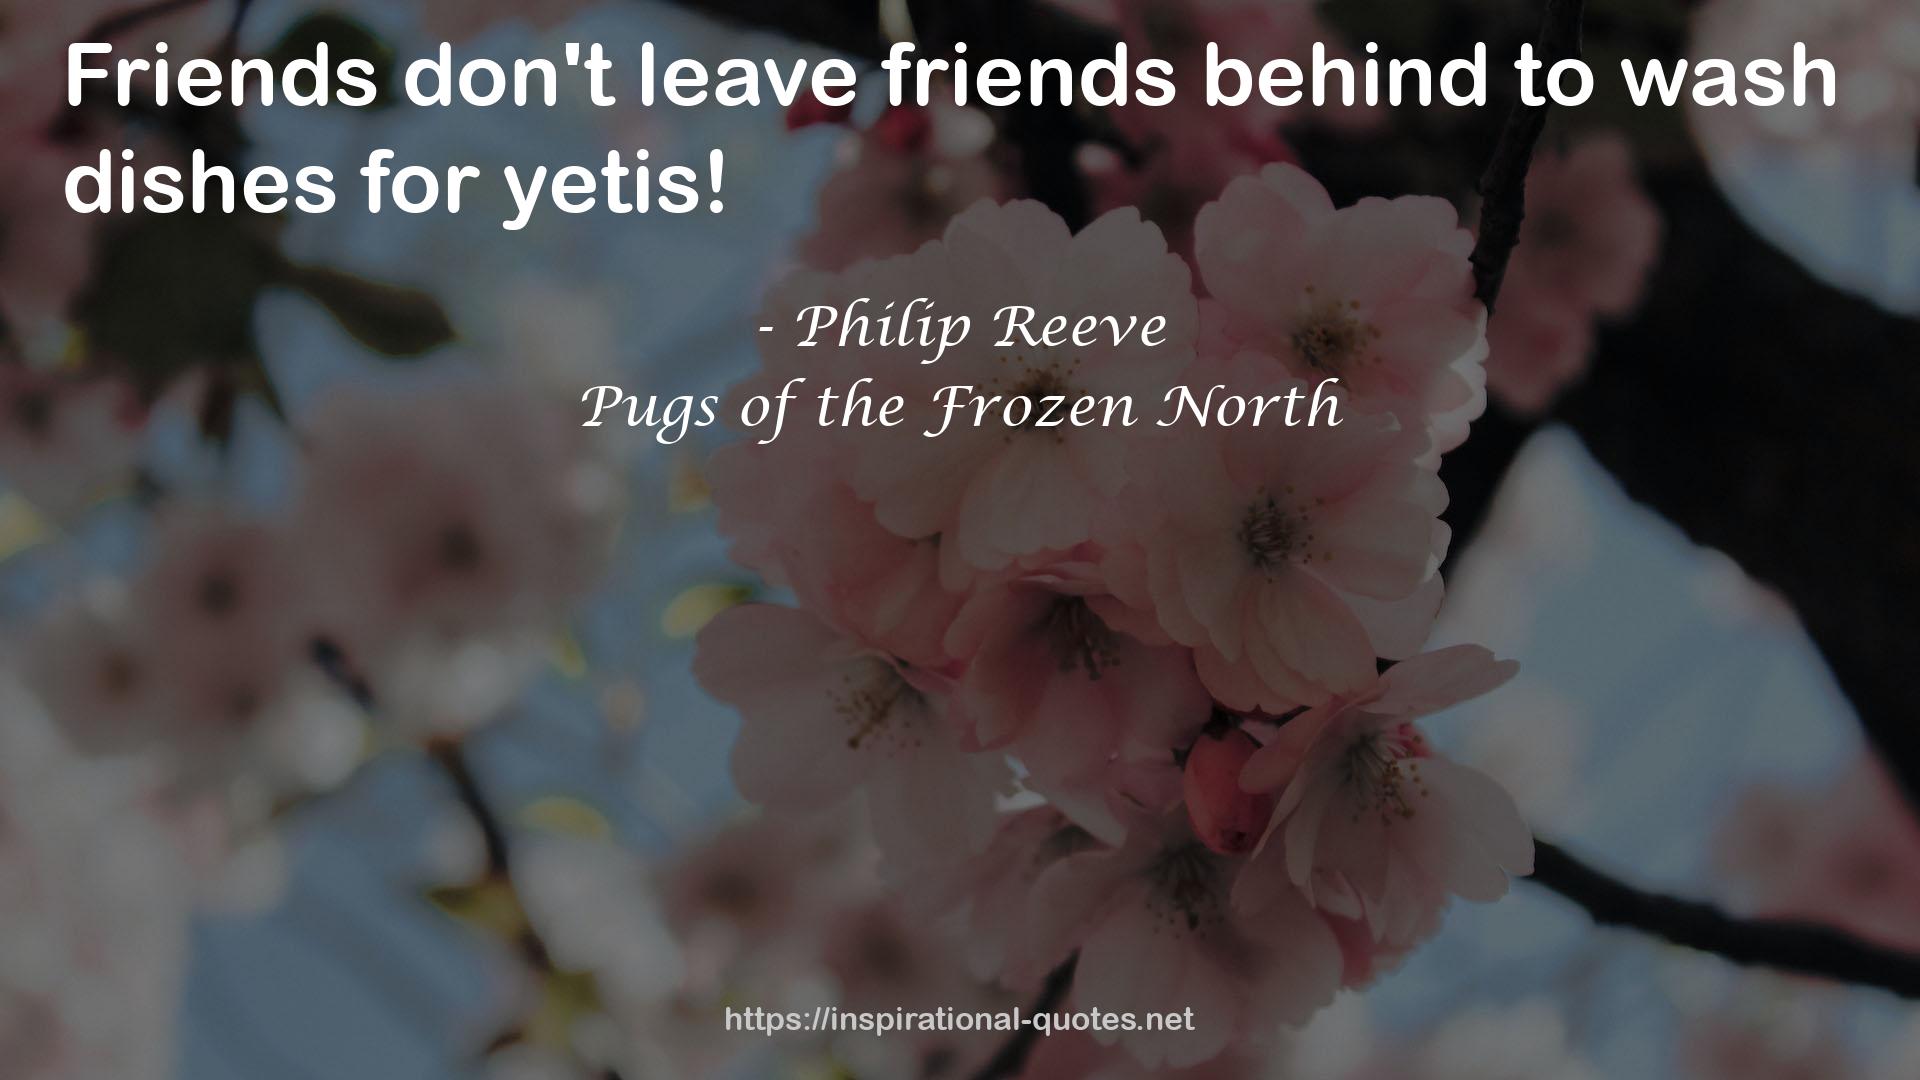 Pugs of the Frozen North QUOTES